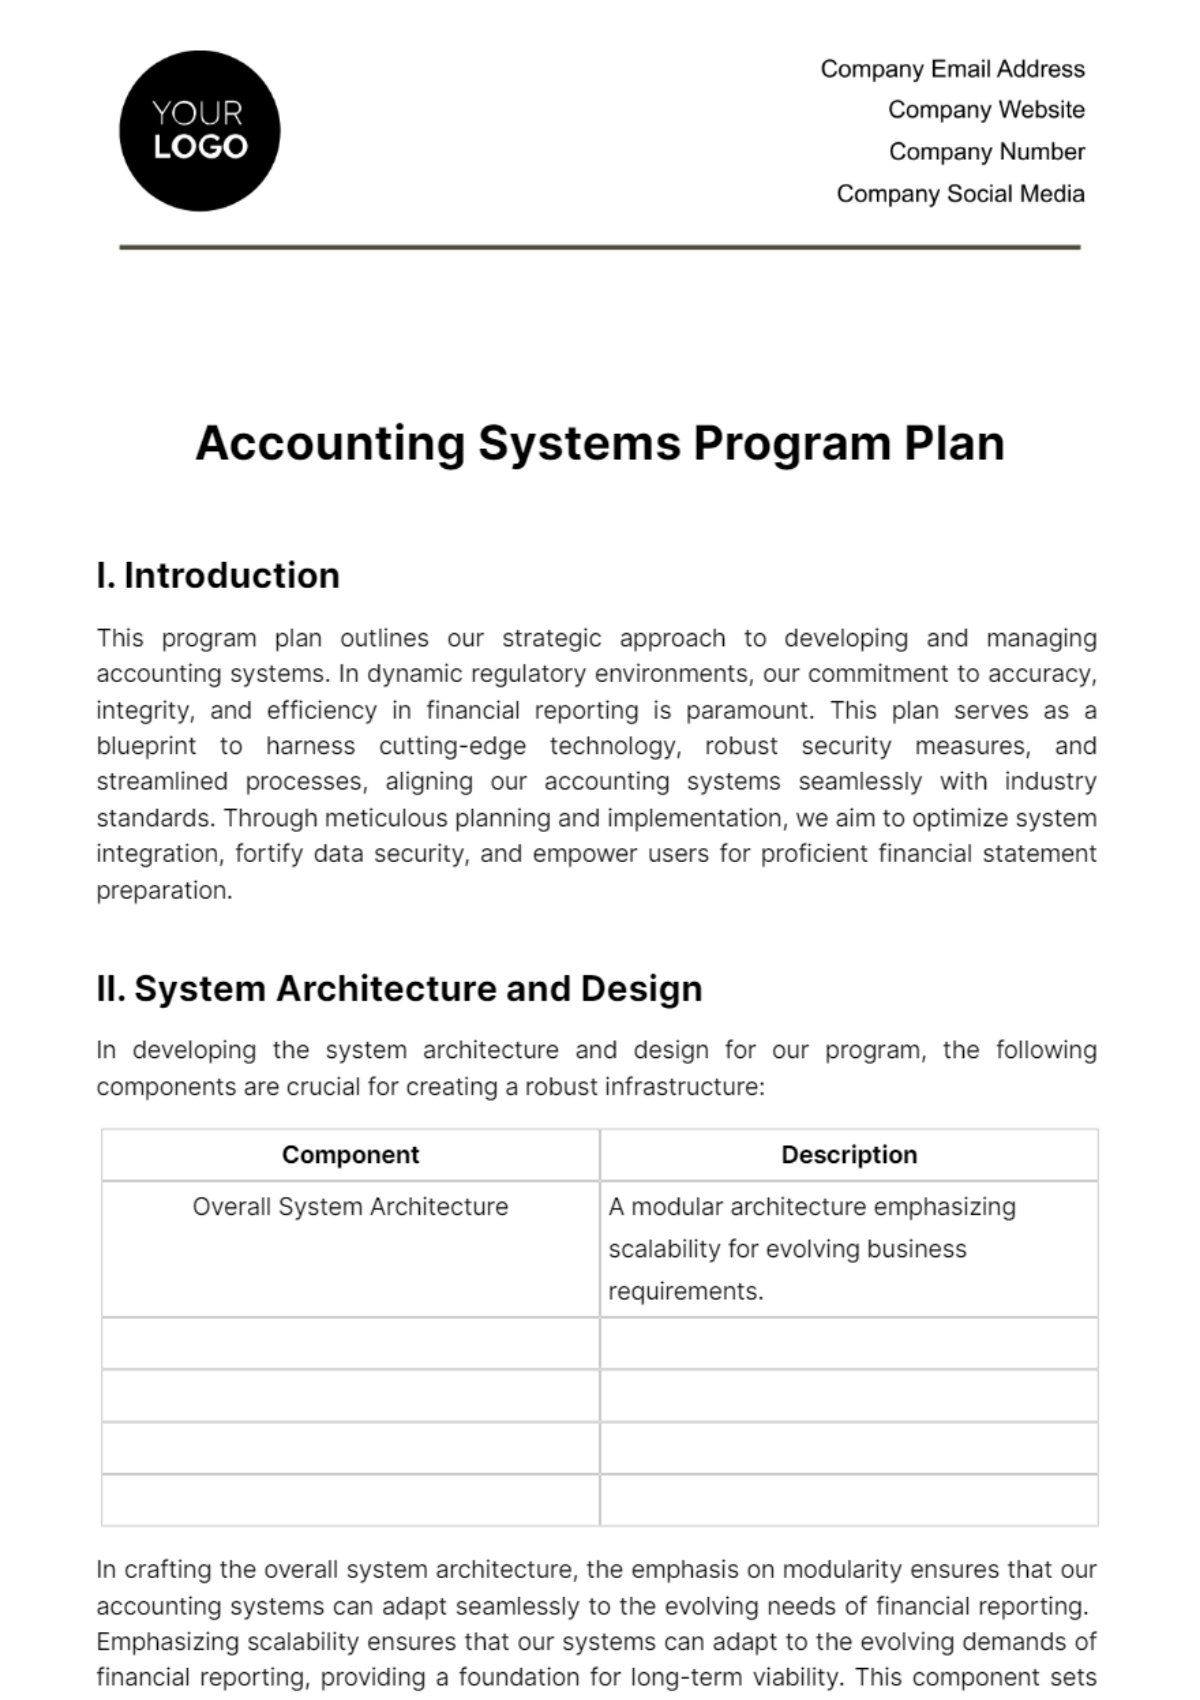 Accounting Systems Program Plan Template